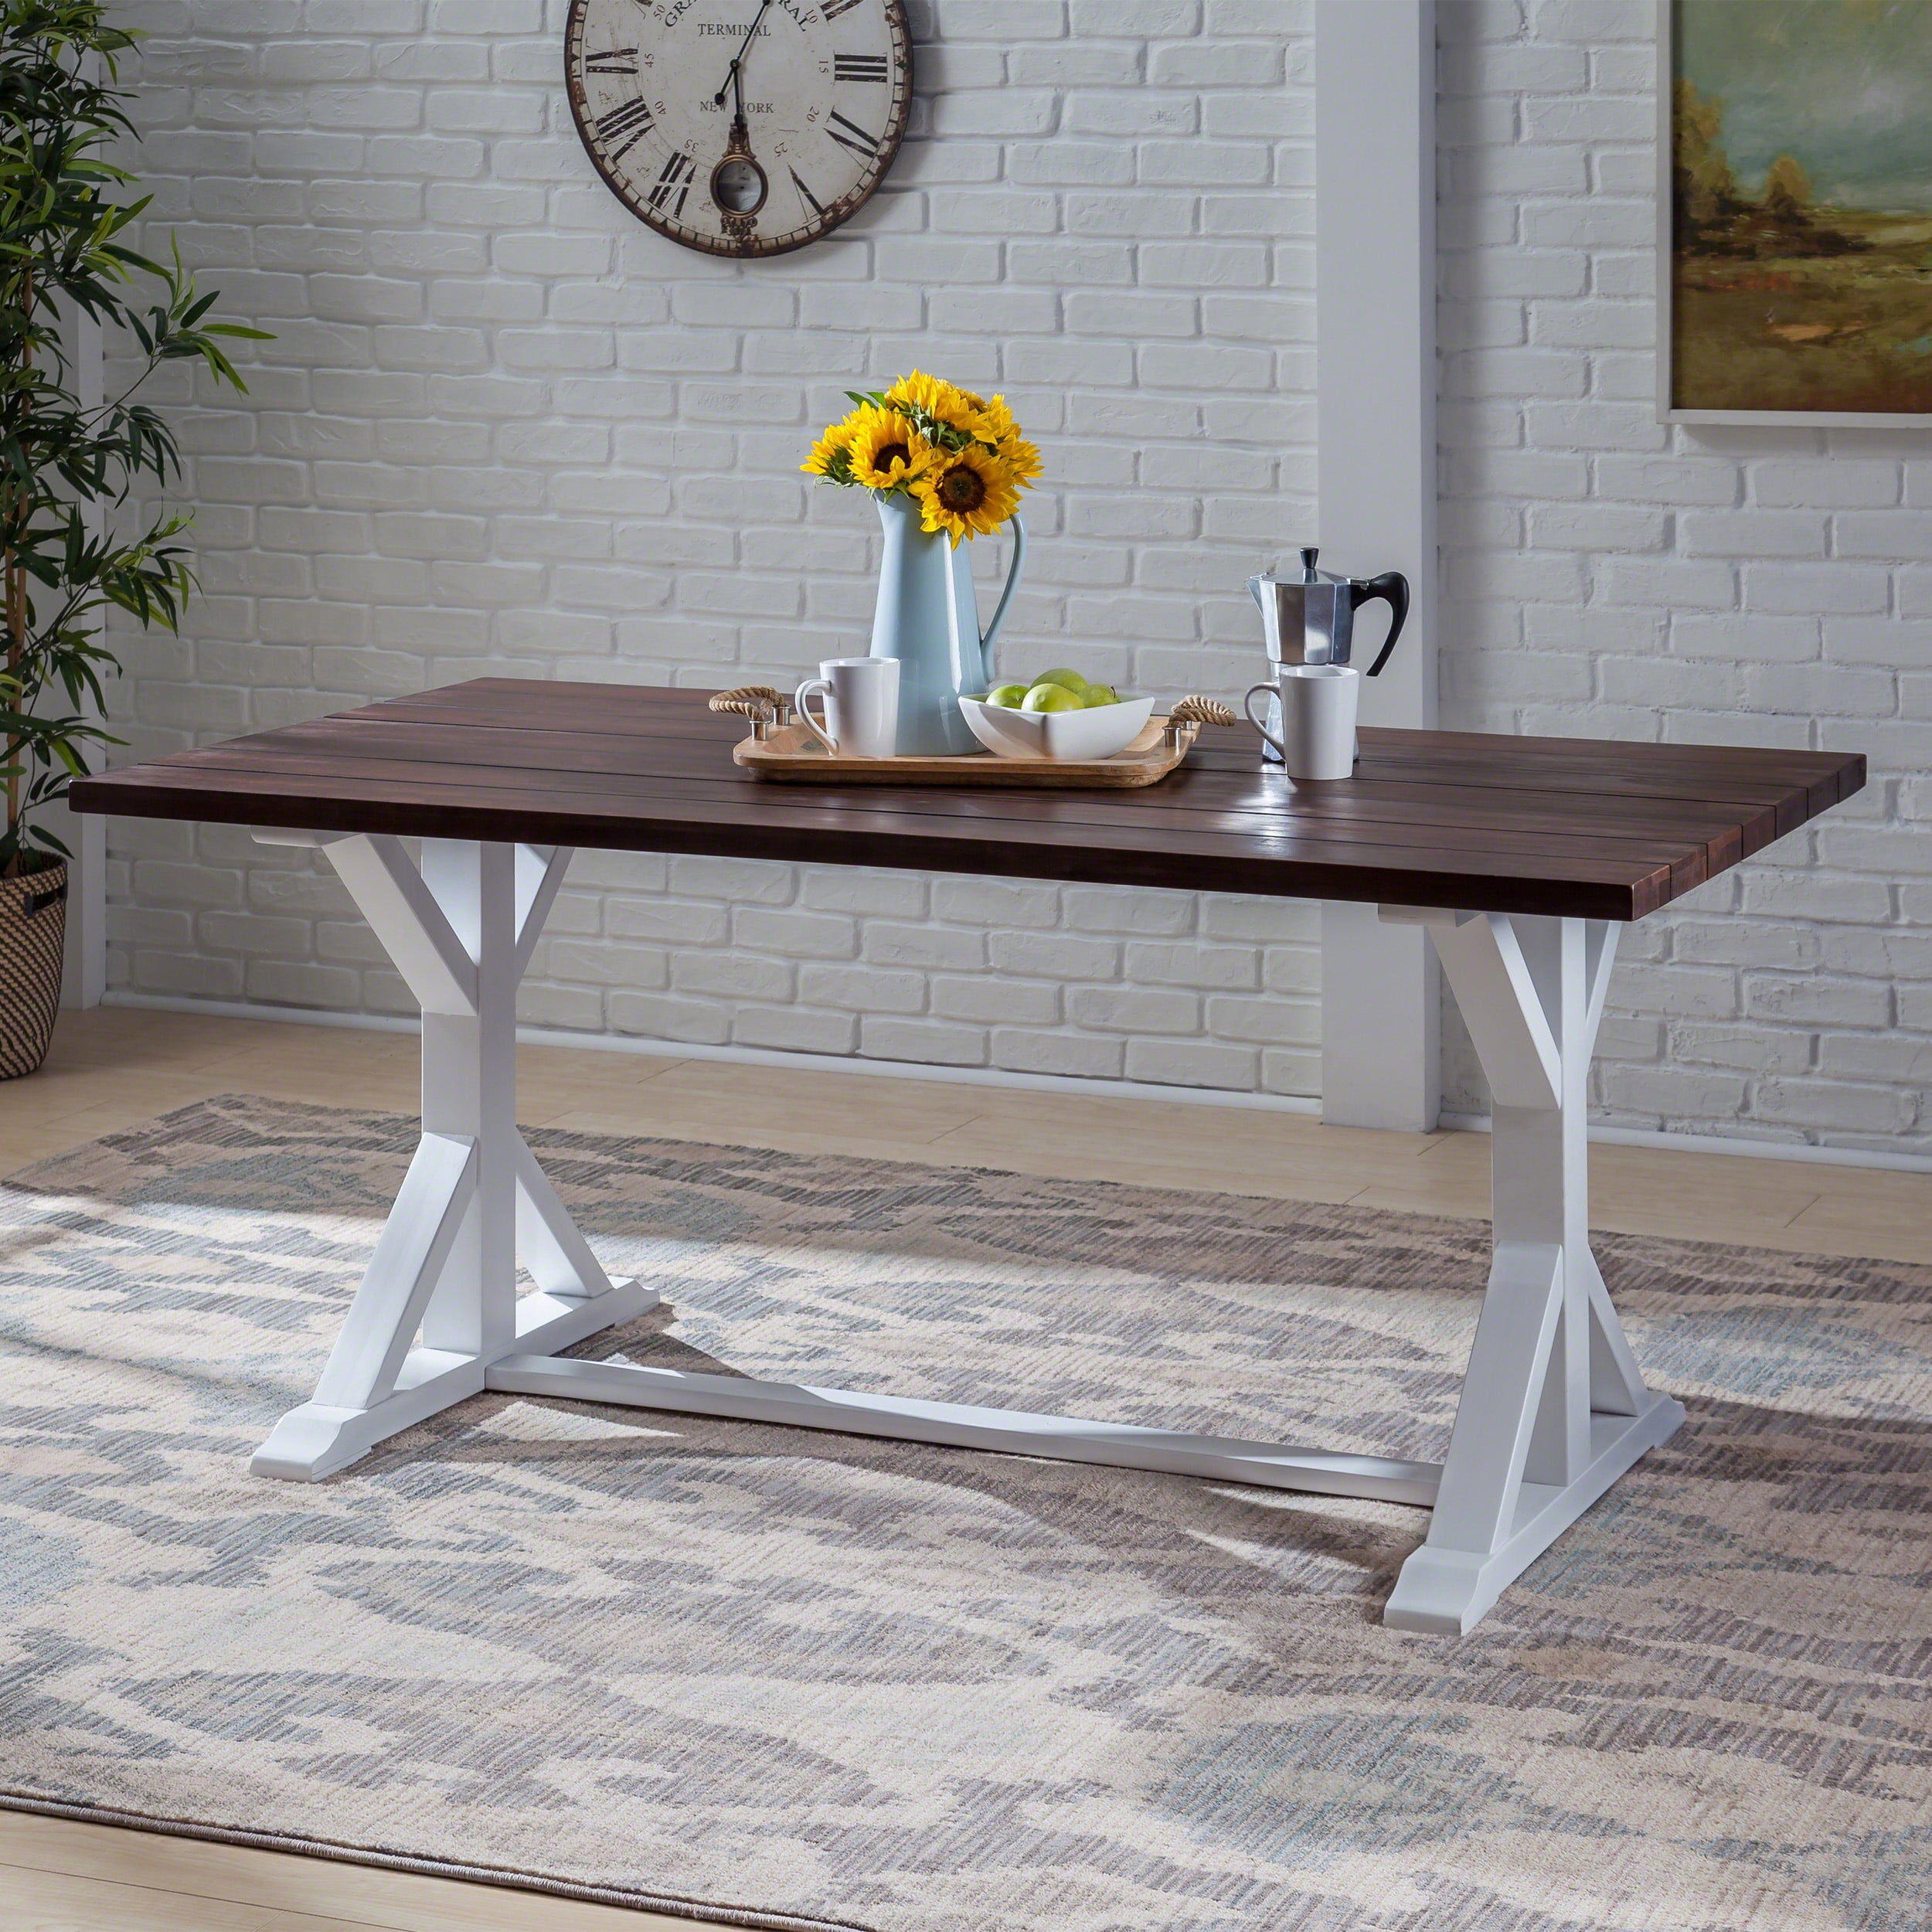 Mayo Rustic Farmhouse Acacia Wood Dining Table, Dark Brown And White